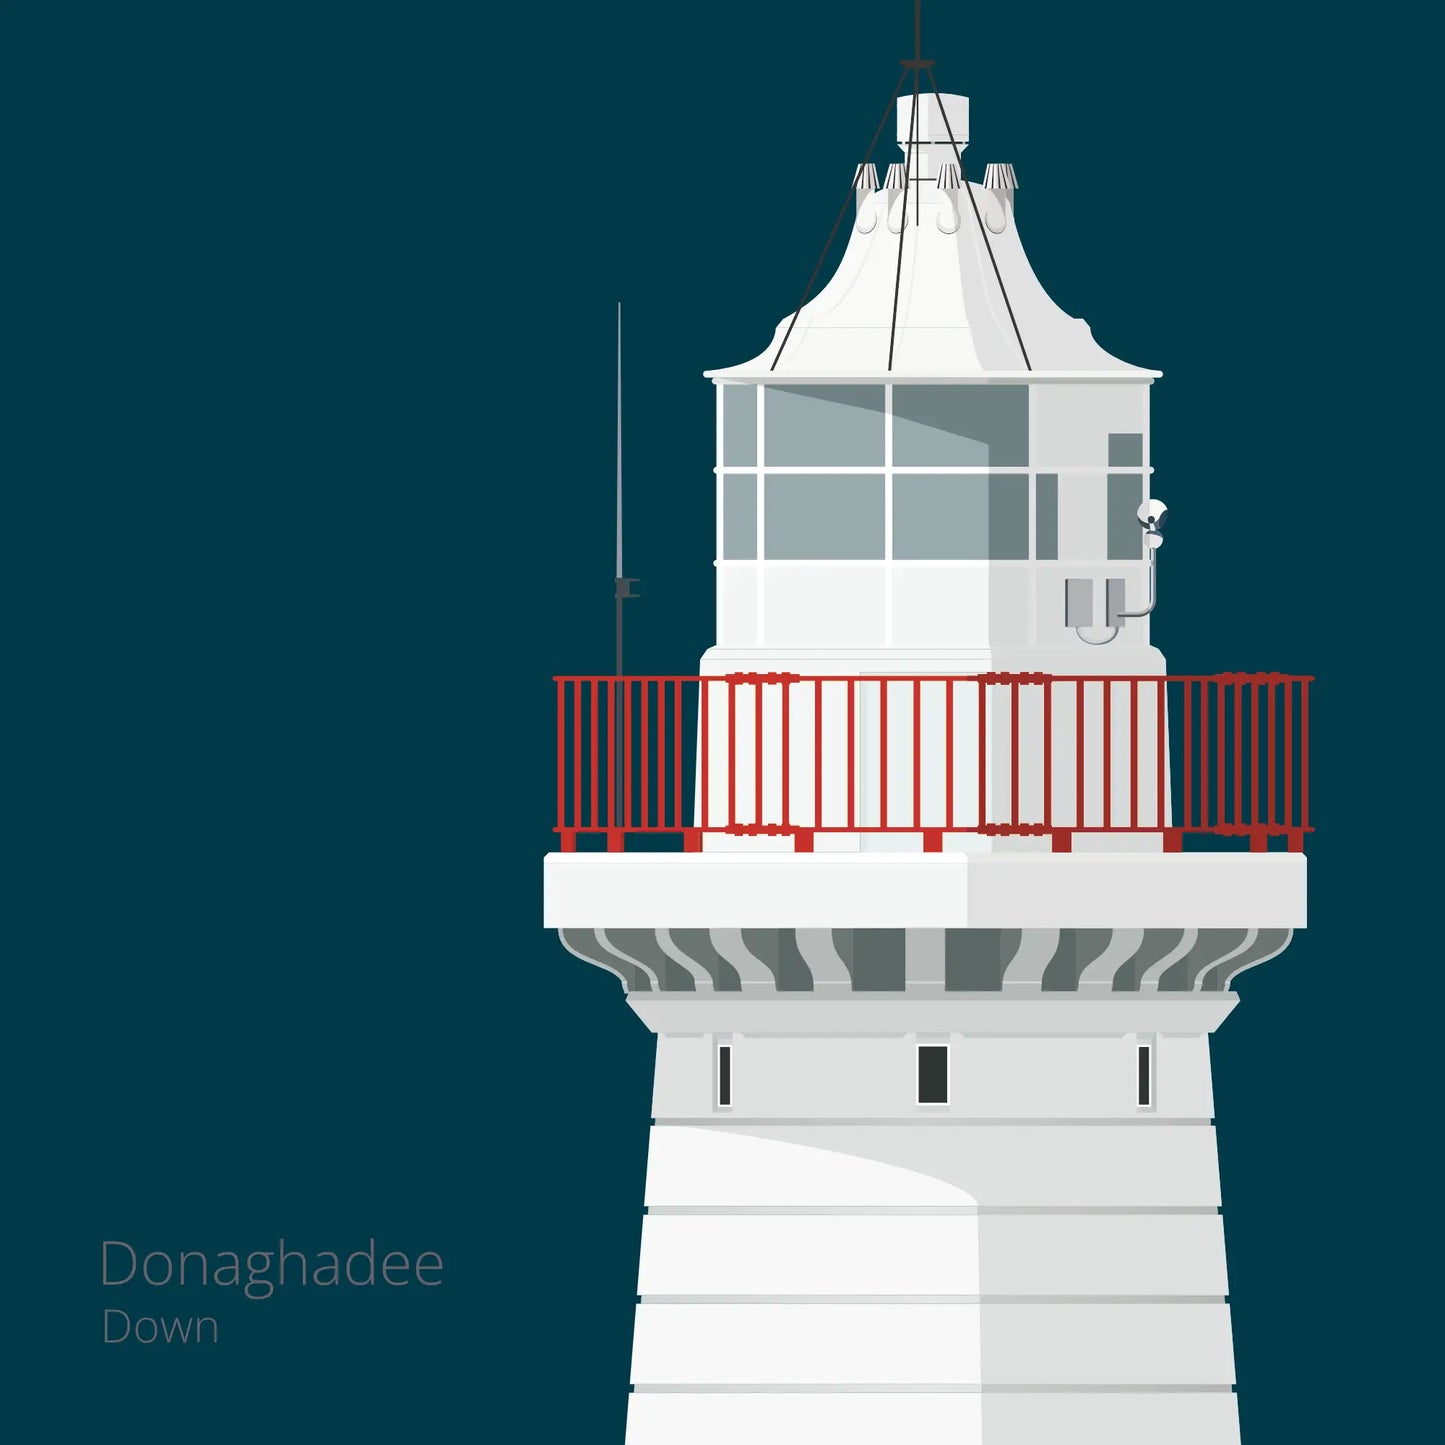 Illustration of Donaghadee lighthouse on a midnight blue background